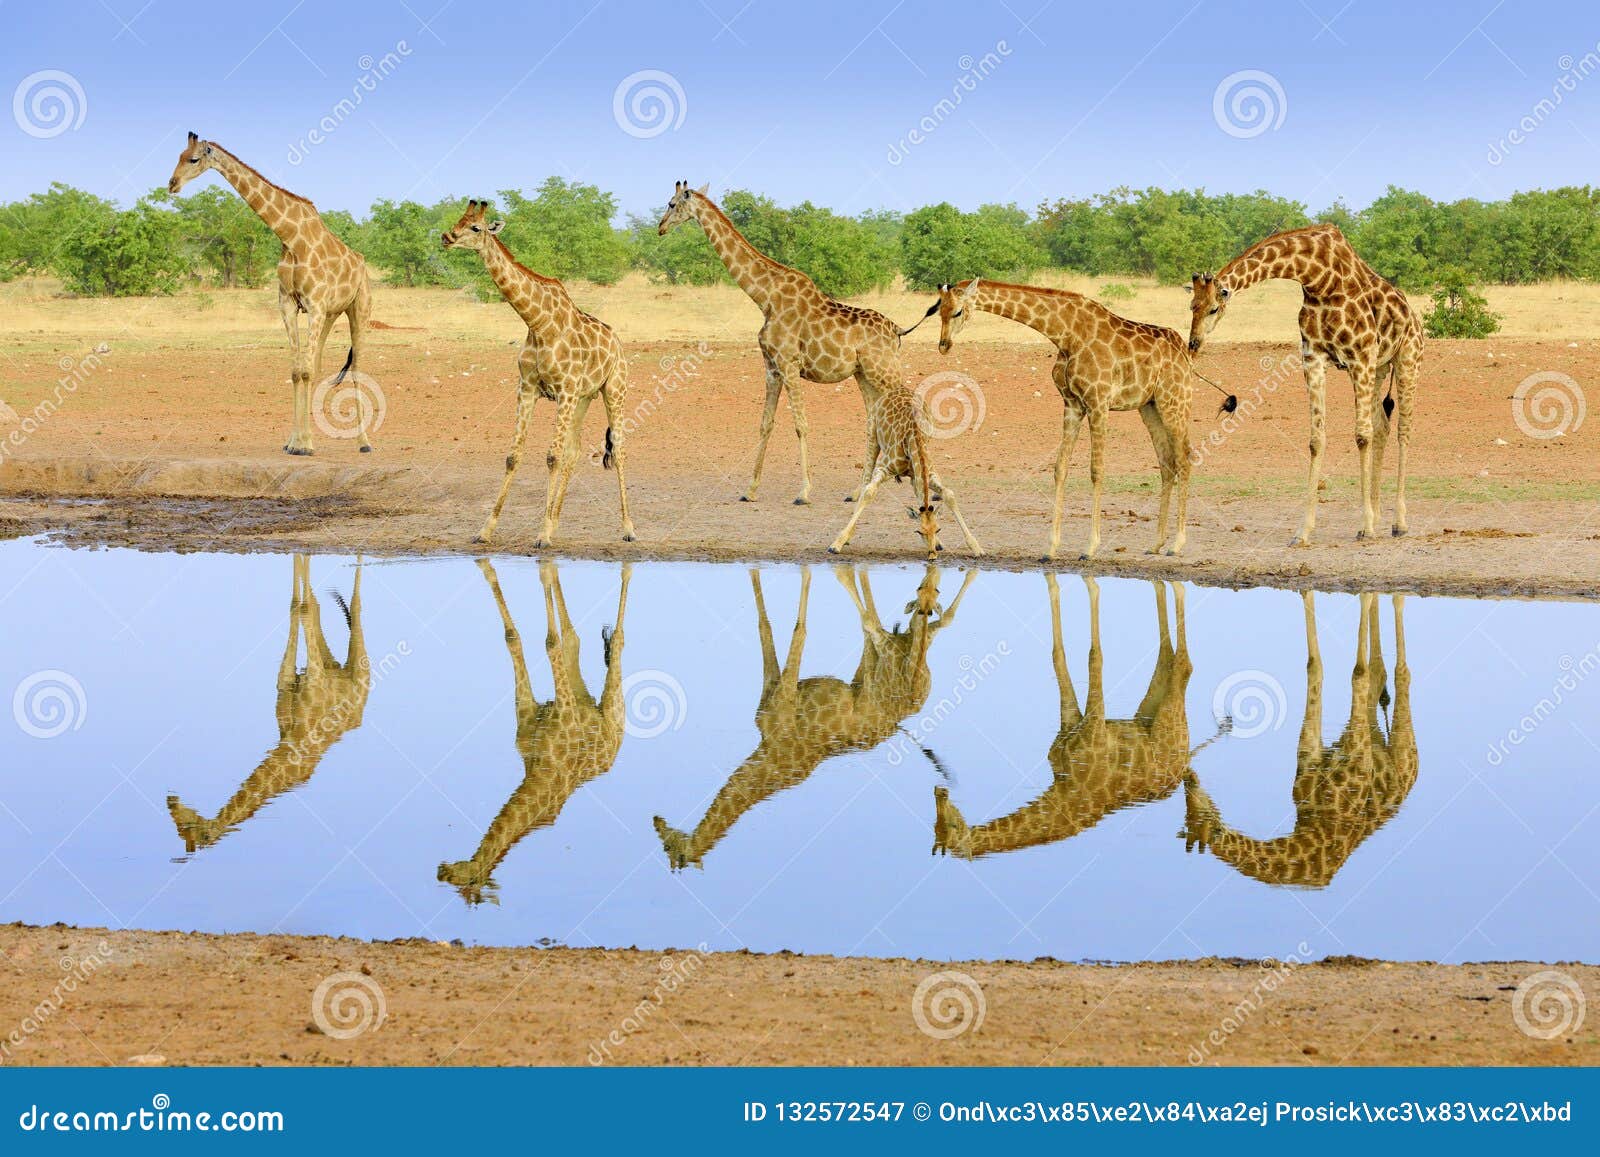 group of giraffe near the water hole, mirror reflection in the still water, etosha np, namibia, africa. a lot of giraffe in the